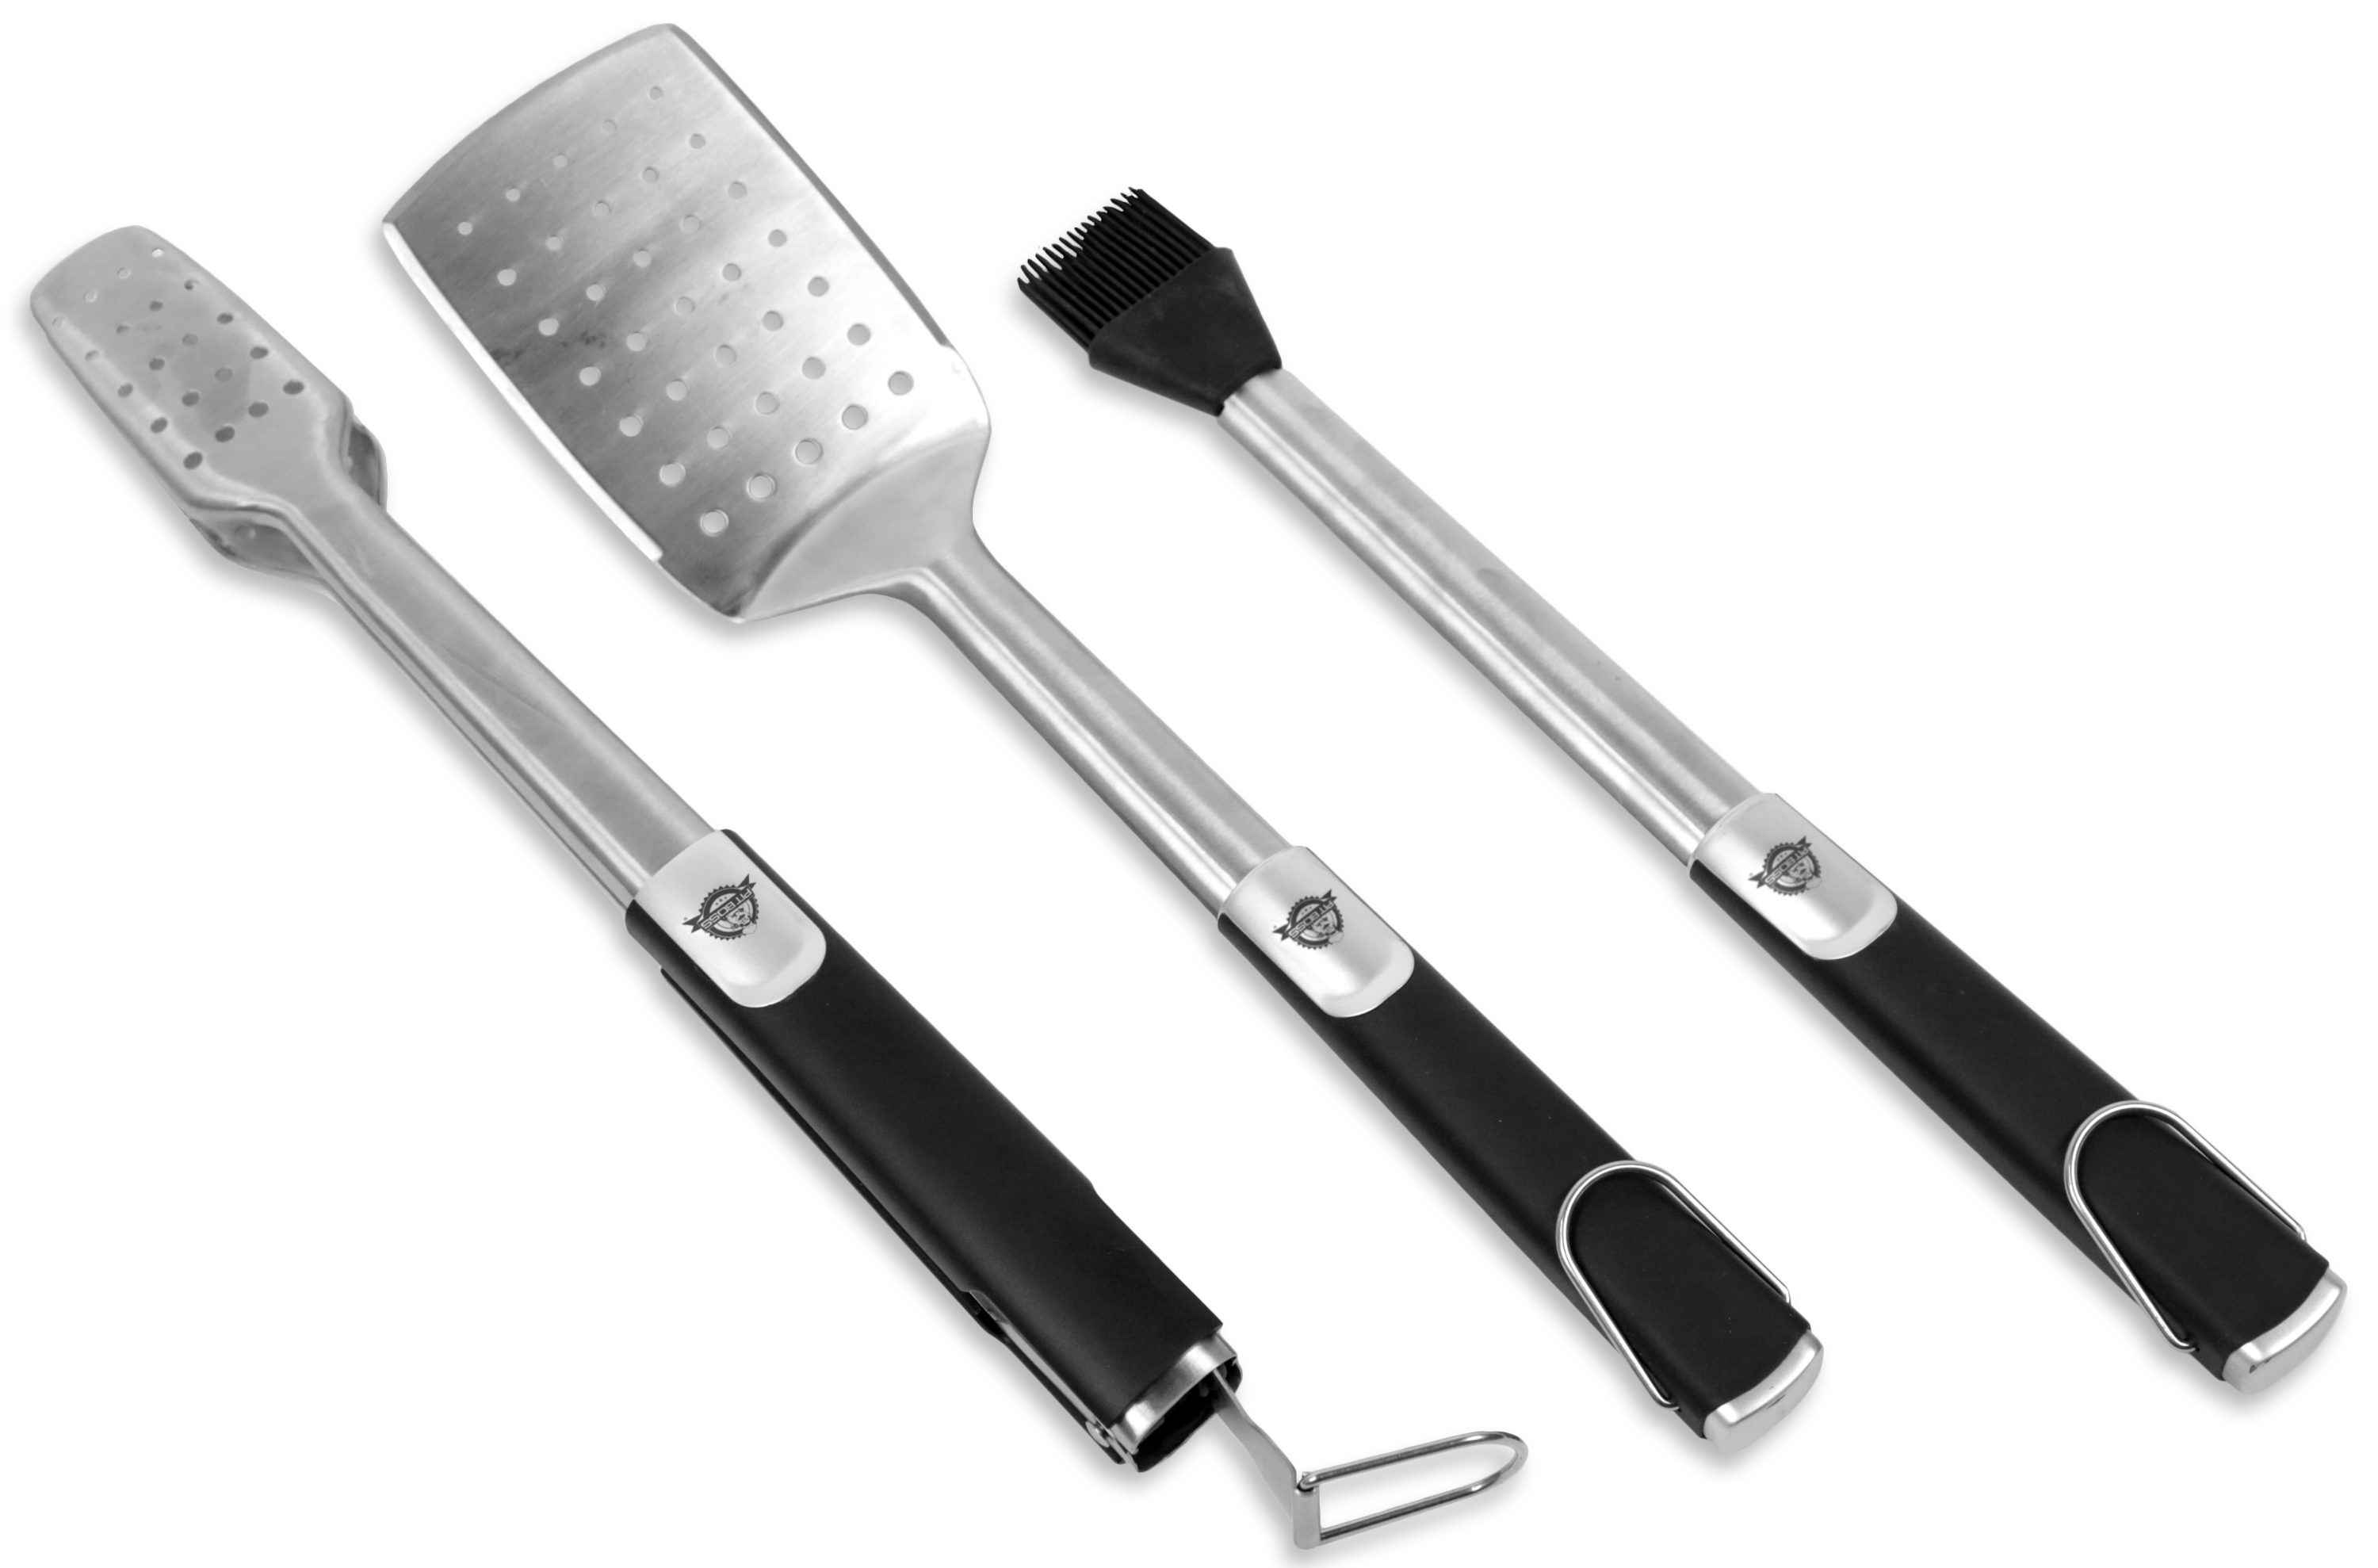 Pit Boss Six Piece BBQ Tool Set with Case - Spatula, Thermometer, Knife,  Injector, Brush, and Tongs 